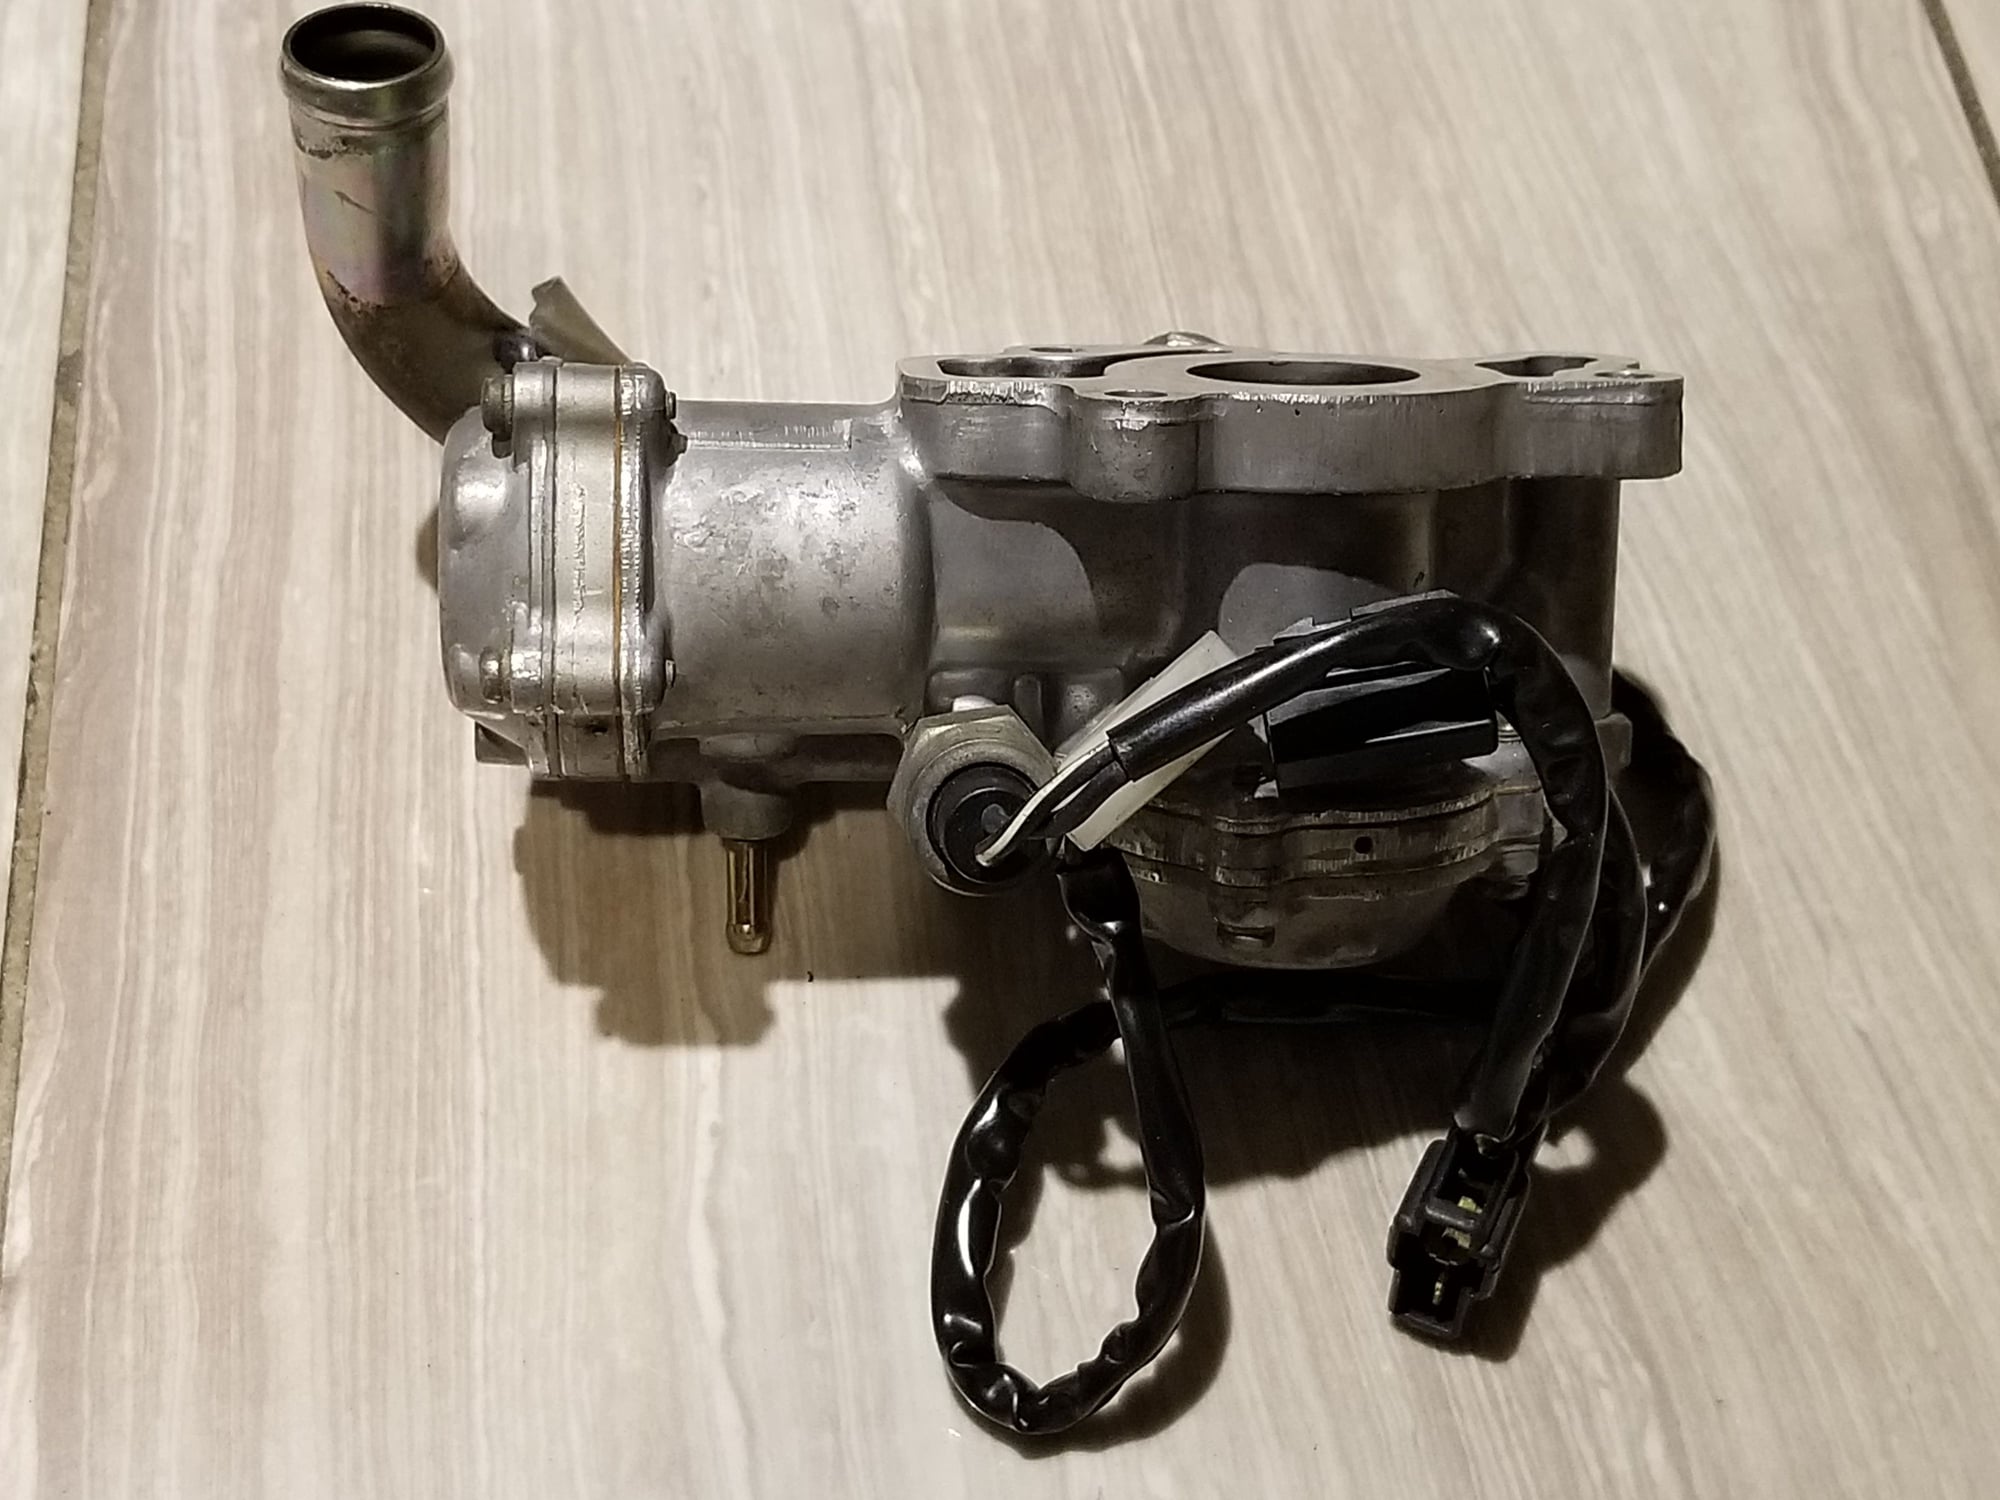 Engine - Intake/Fuel - FD3S Air Control Valve Diverter ACV Emission OEM N3A4-13-990 - Used - 1993 to 2002 Mazda RX-7 - Toronto, ON M9A3G2, Canada